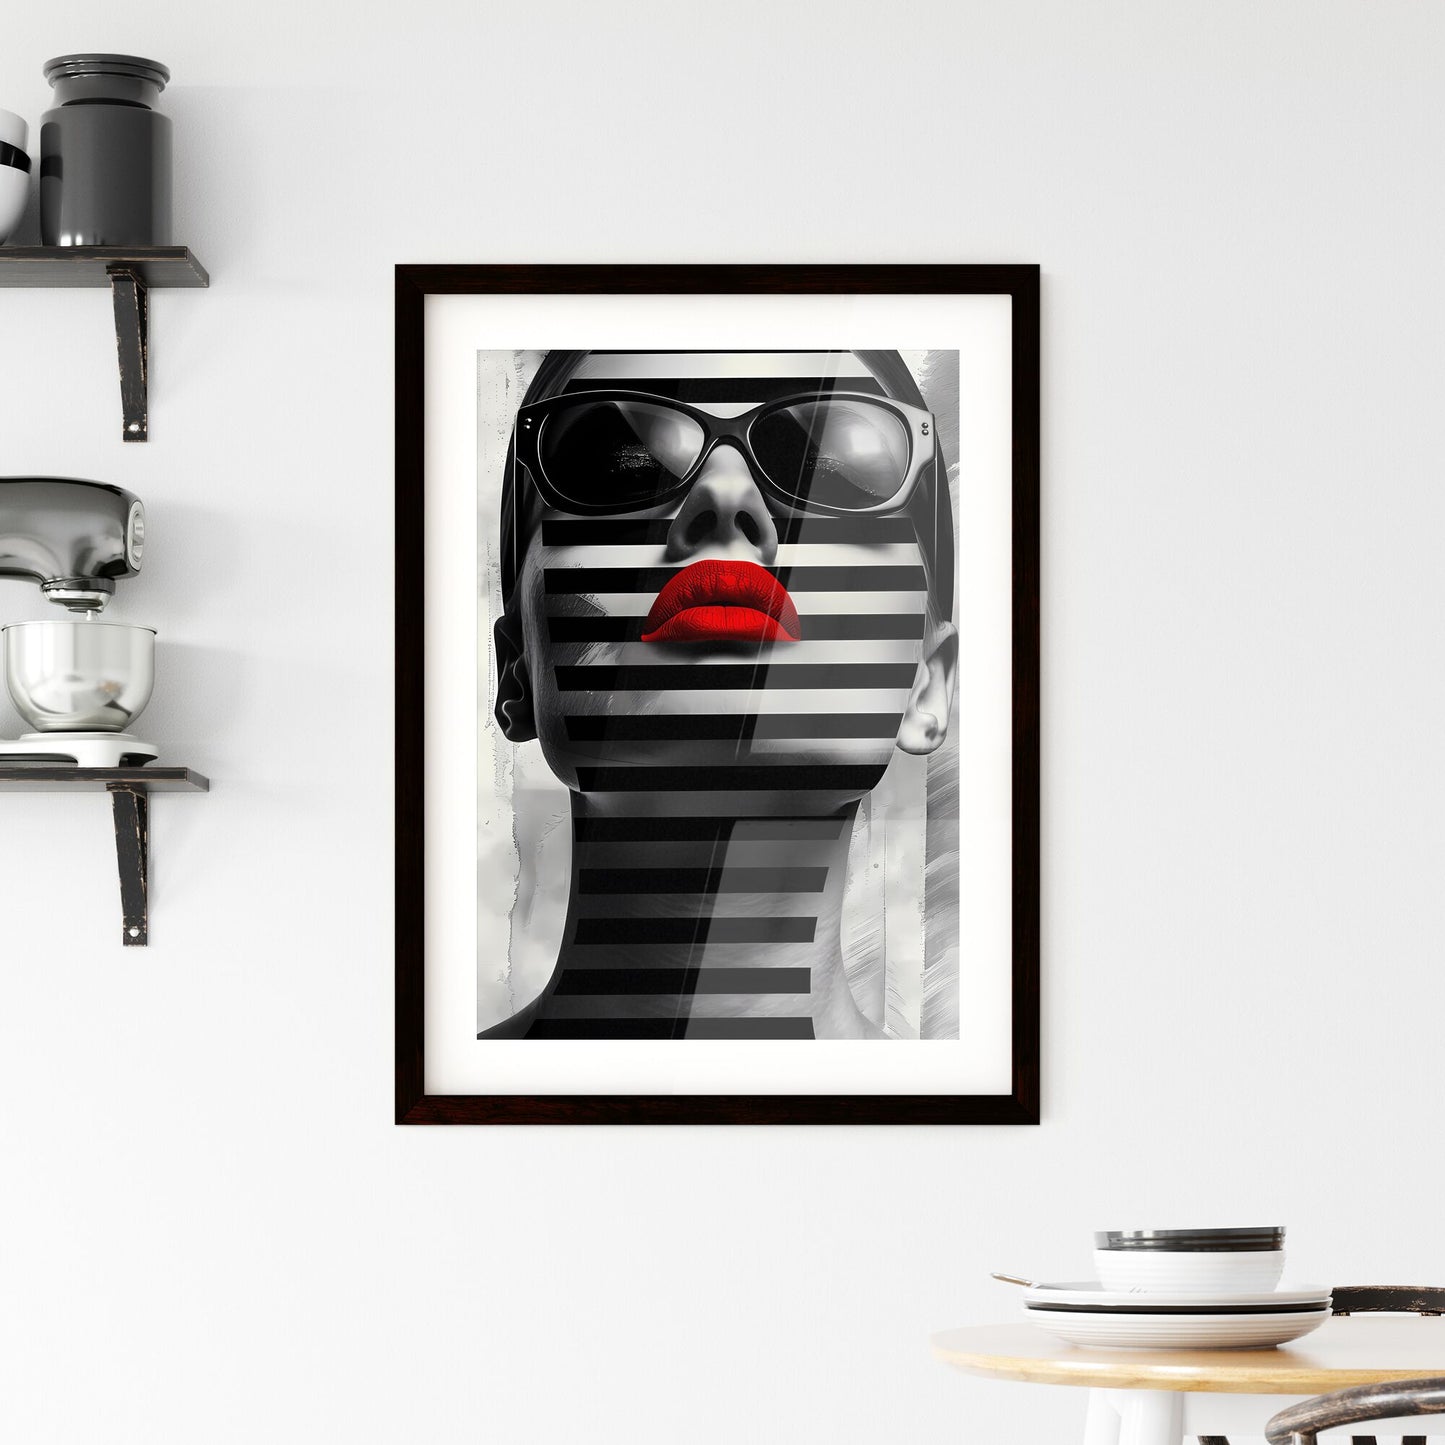 Striped Minimalist Masterpiece: Striking Black and White Artwork for Timeless Style and Elegance Default Title